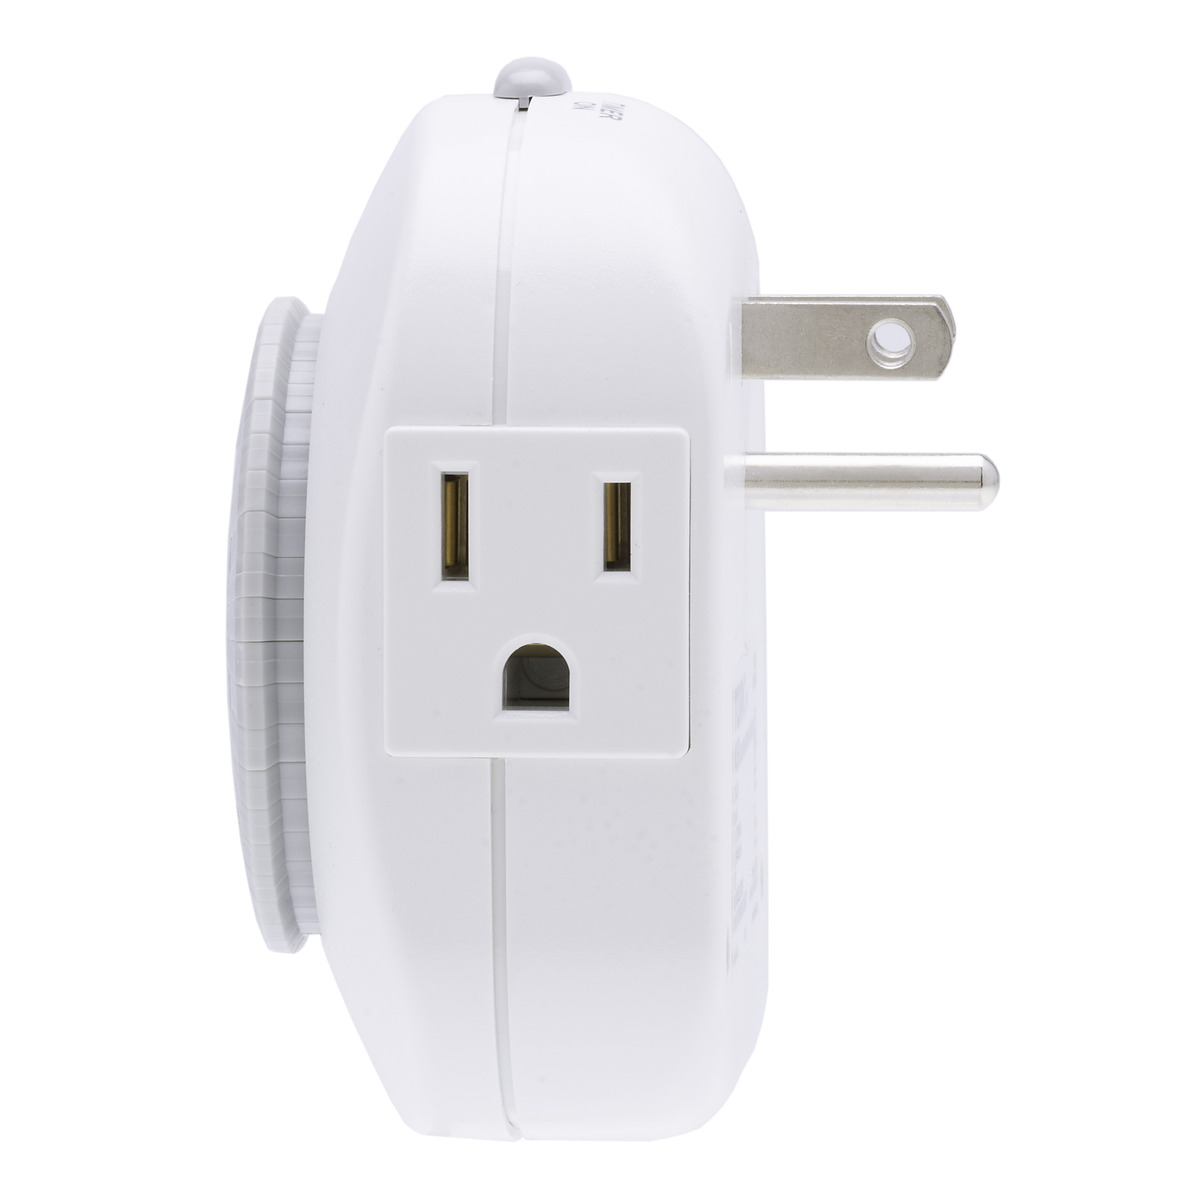 2x Indoor 24-Hour Plug In Grounded Daily Mechanical 2 Outlet Timer Light  Switch 879565106829